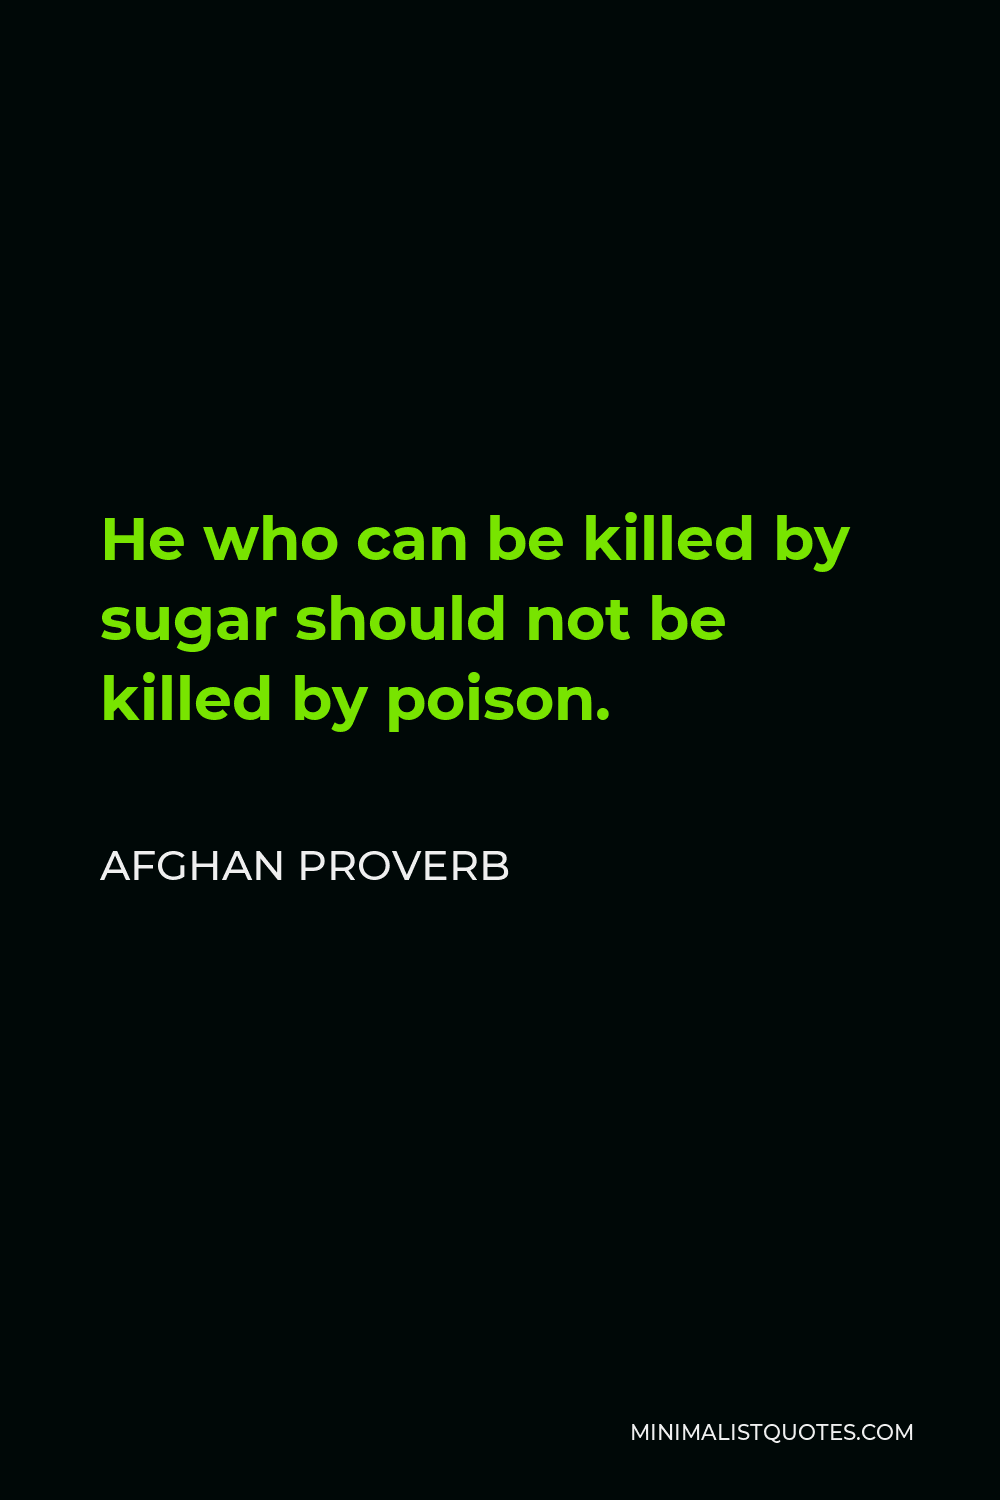 Afghan Proverb Quote - He who can be killed by sugar should not be killed by poison.